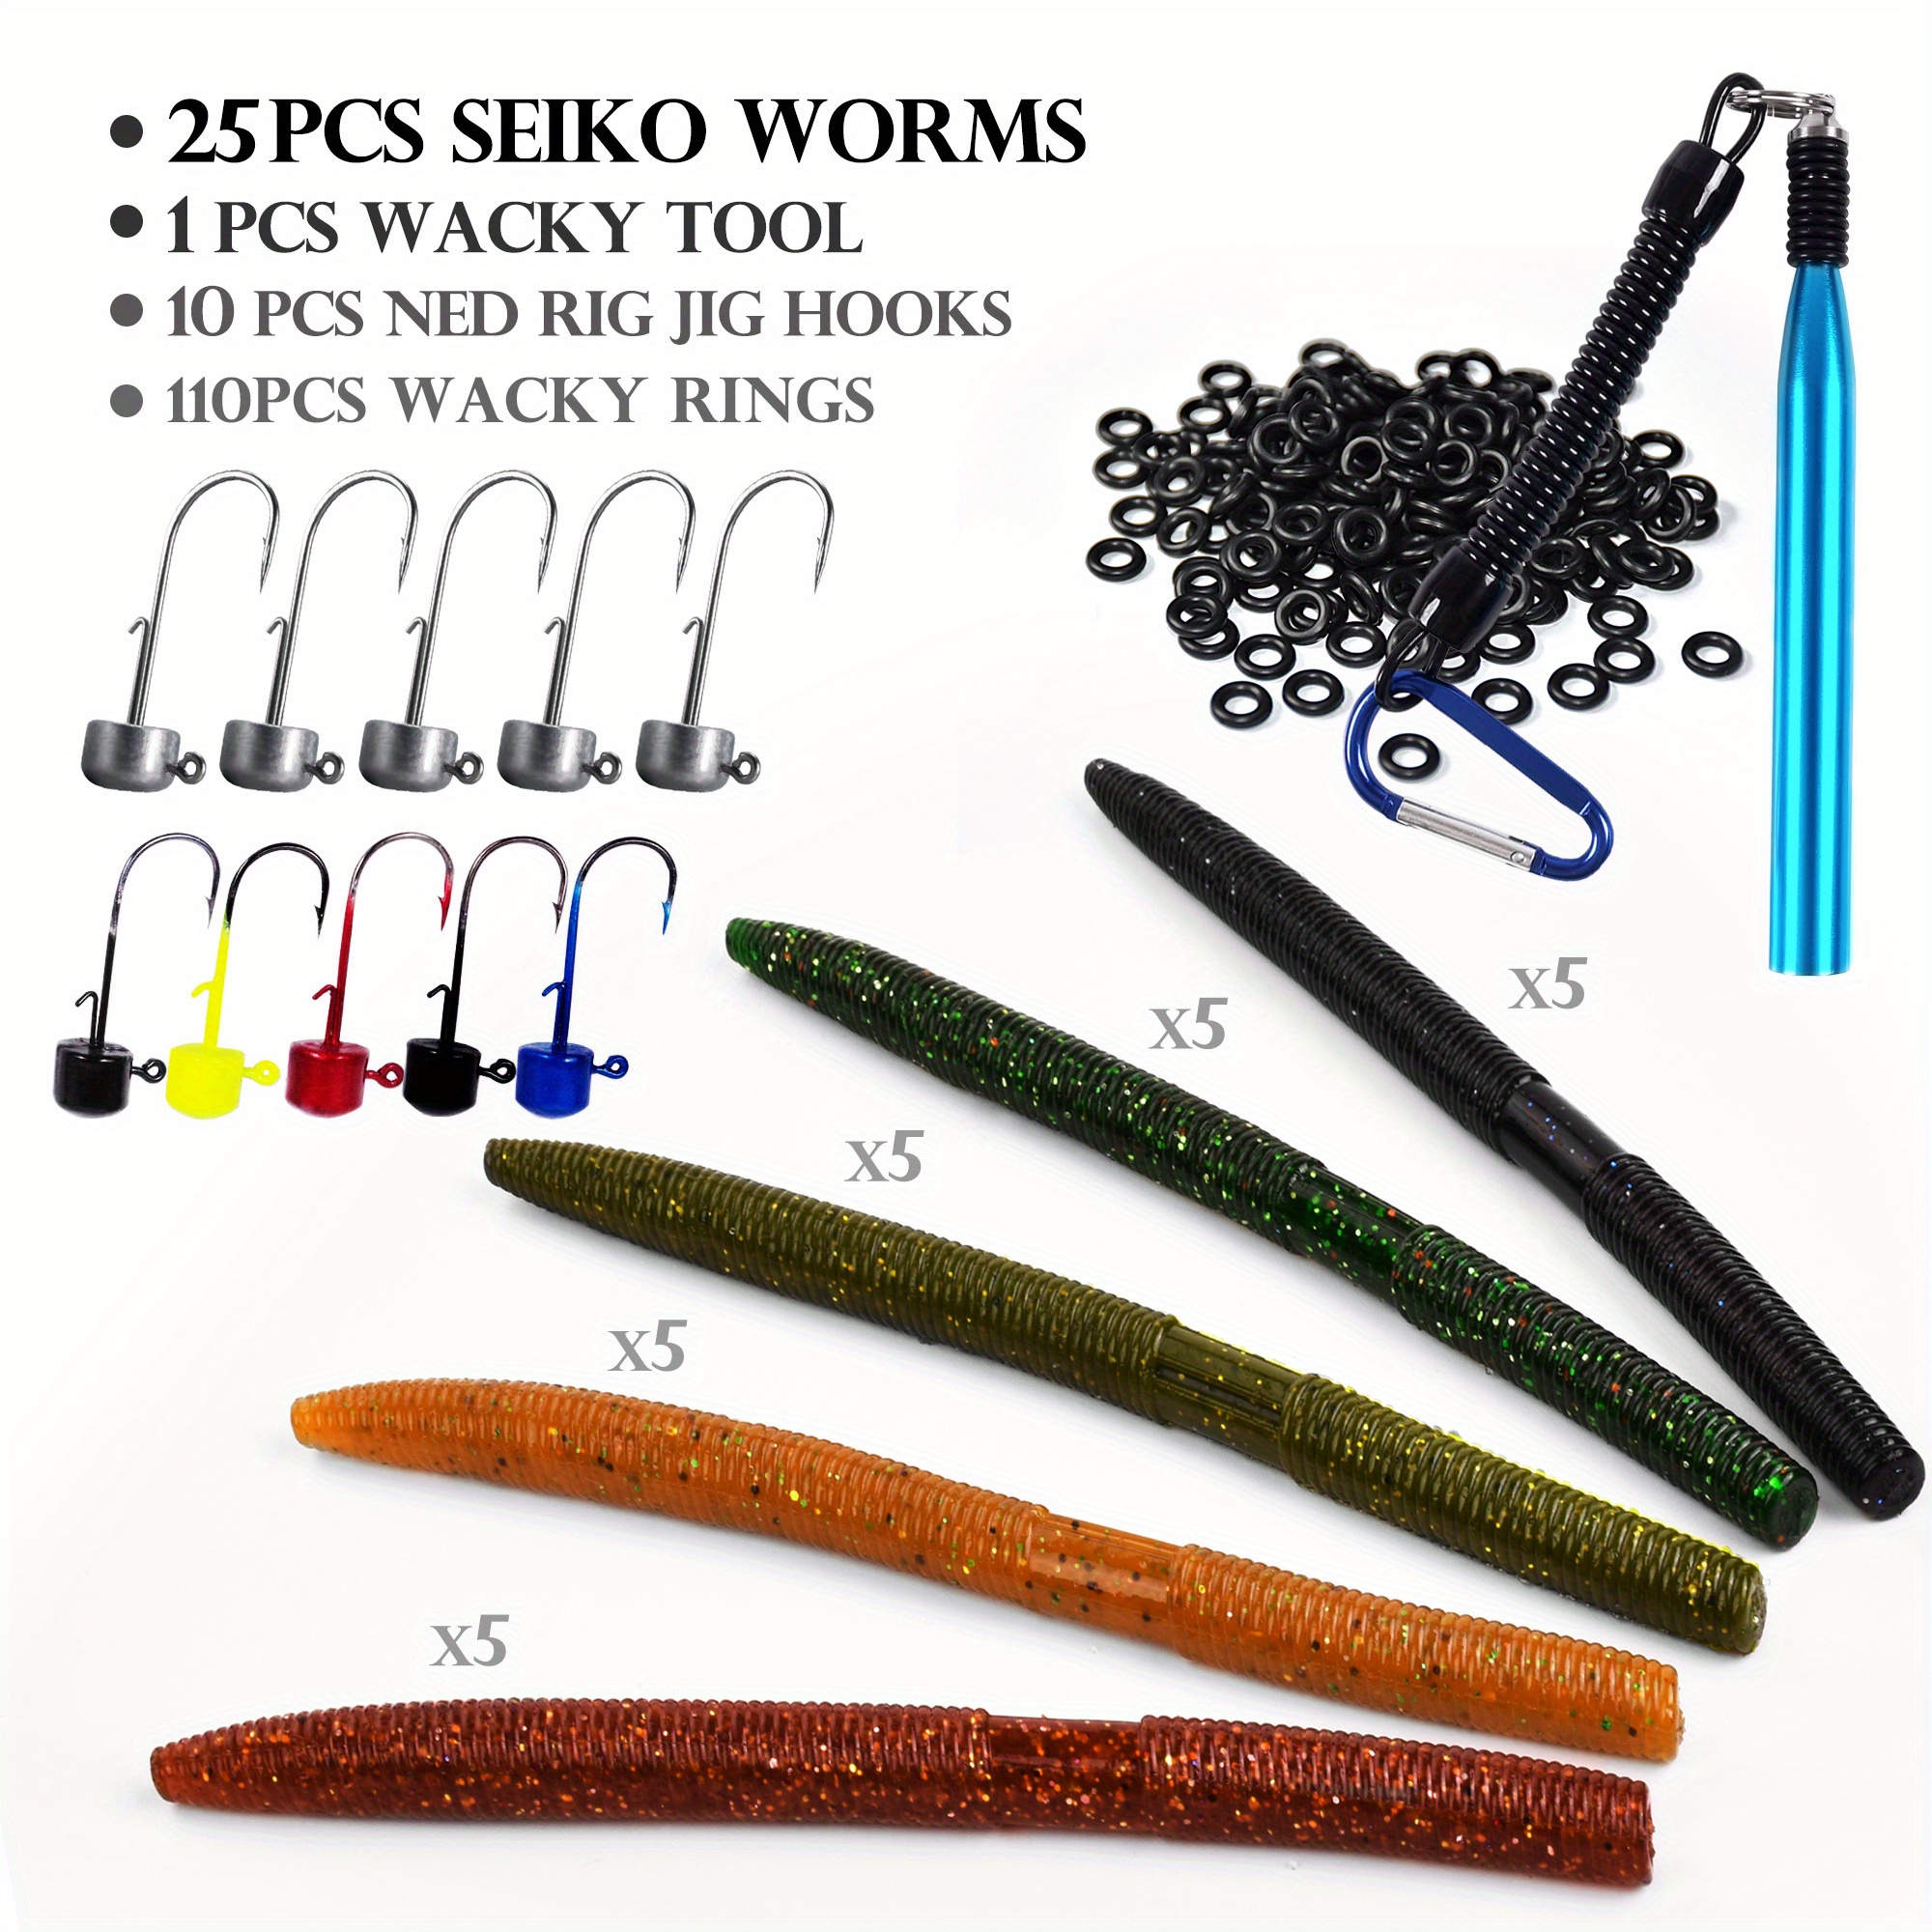 Buy RUNATURE Senko Lures Kit Fishing Tackle Box With Tackle Including Wacky  Rig Tool, Wacky Rig Hooks, Senko Soft Baits, Wacky Rig O Rings Fishing Gear  for Perch Trout Carp Online at